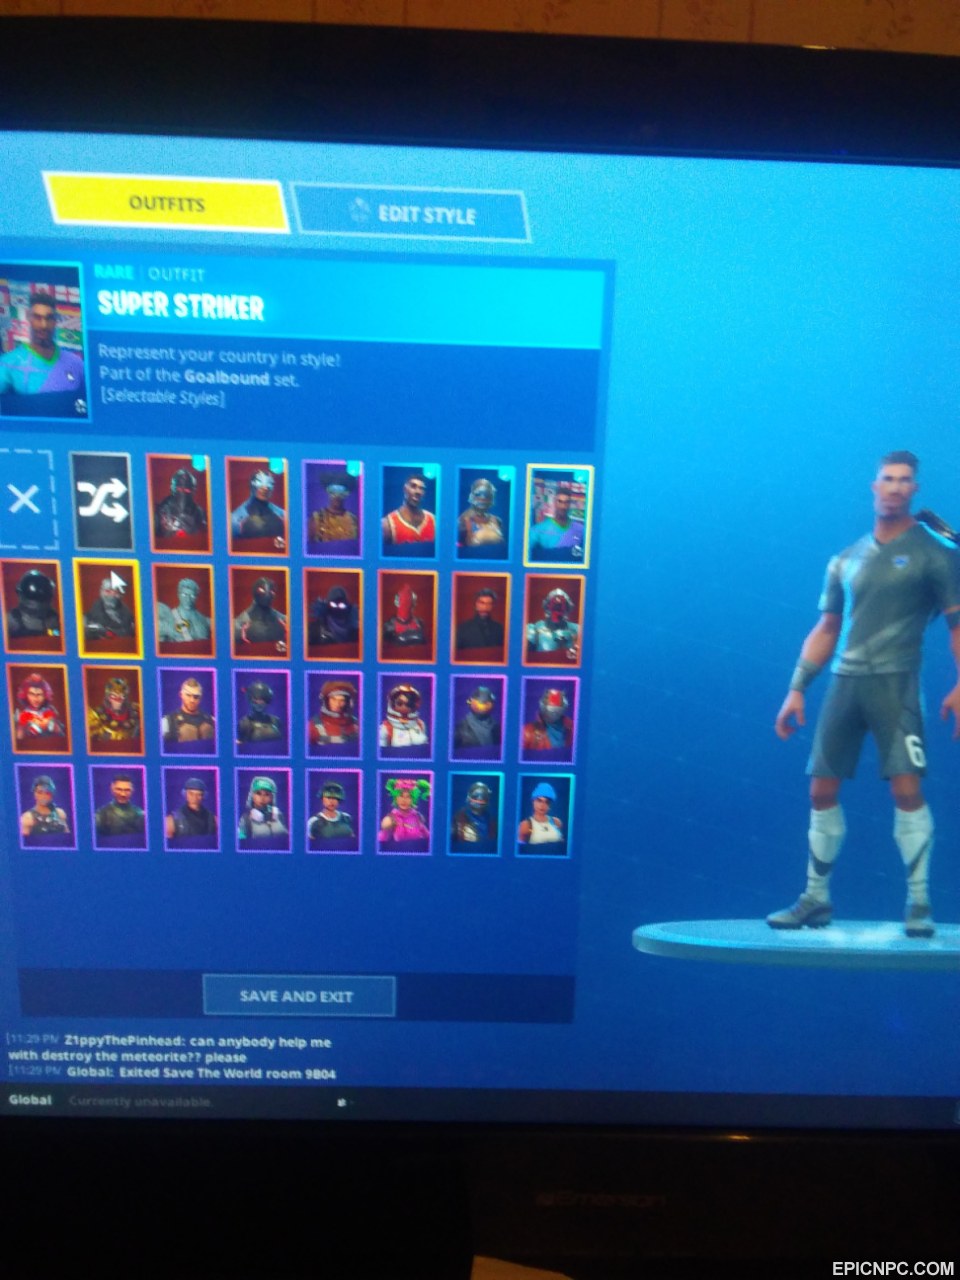 season 5 starts soon here s an easy opportunity to buy a secure og fornite account season 2 3 4 battle passes complete level 85 currently - free og fortnite accounts